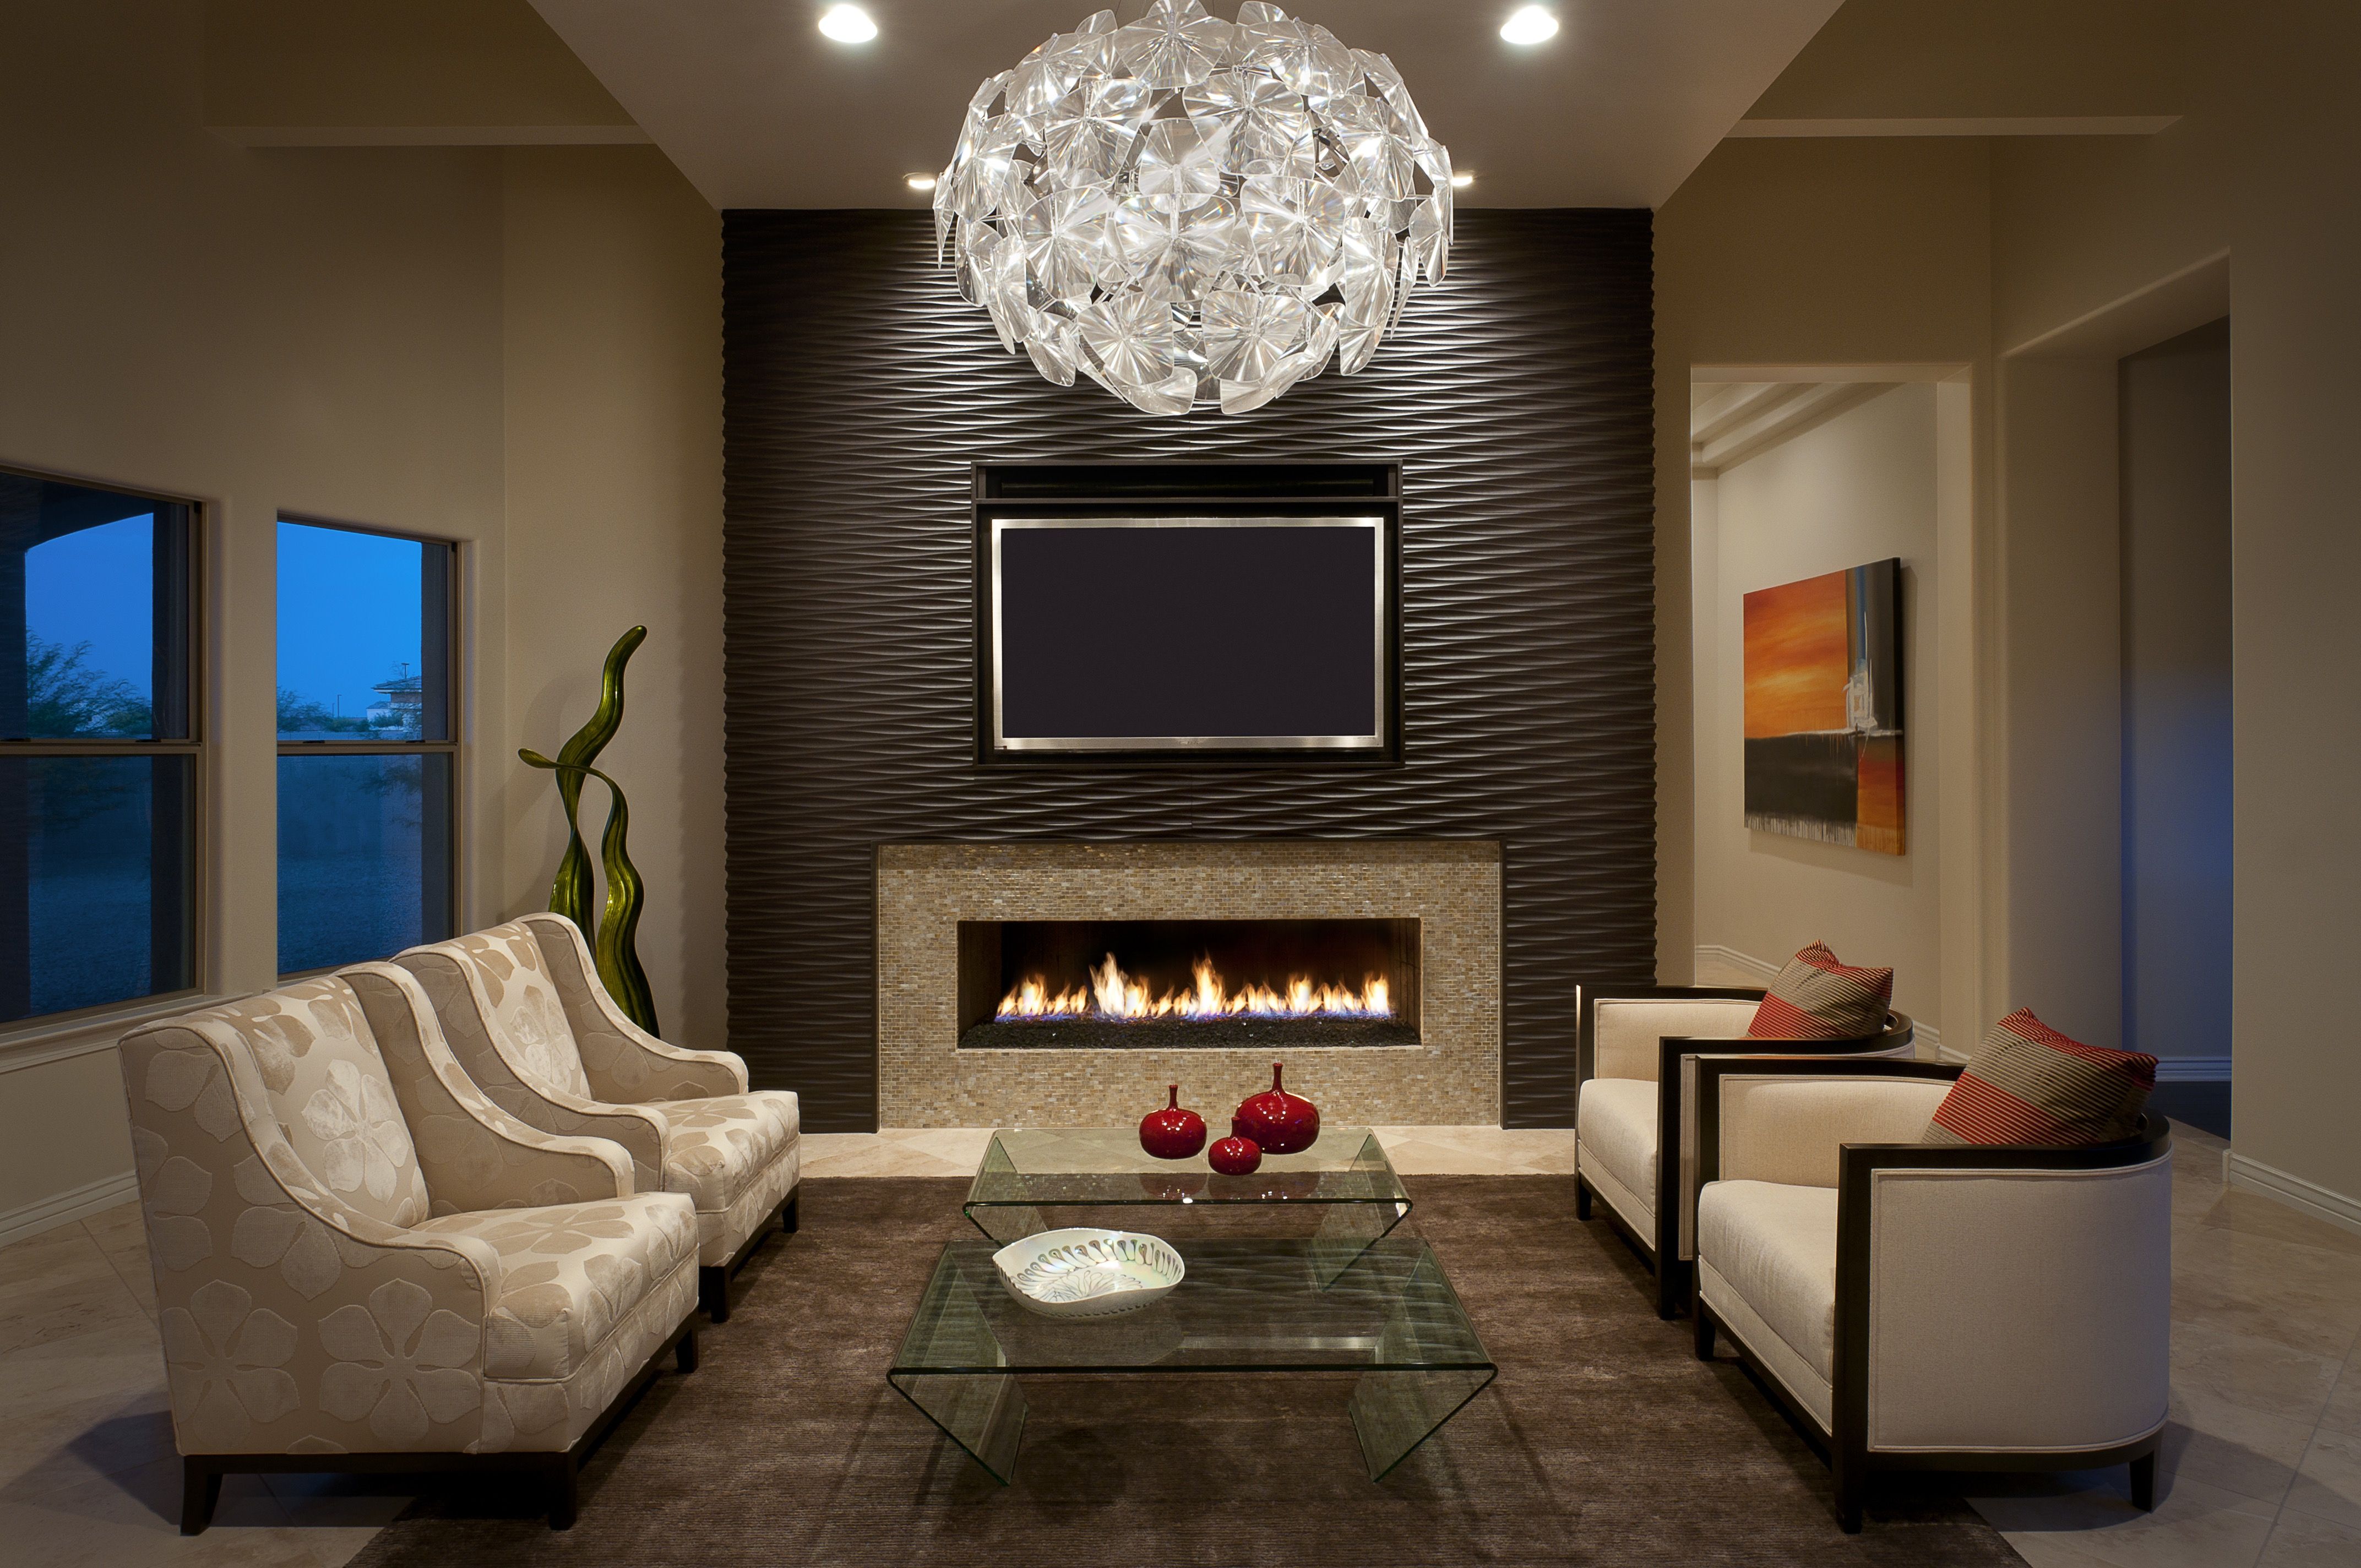 Formal Luxury Living Room With Modern Chandelier And Wood Clad Fireplace Surround (View 7 of 32)